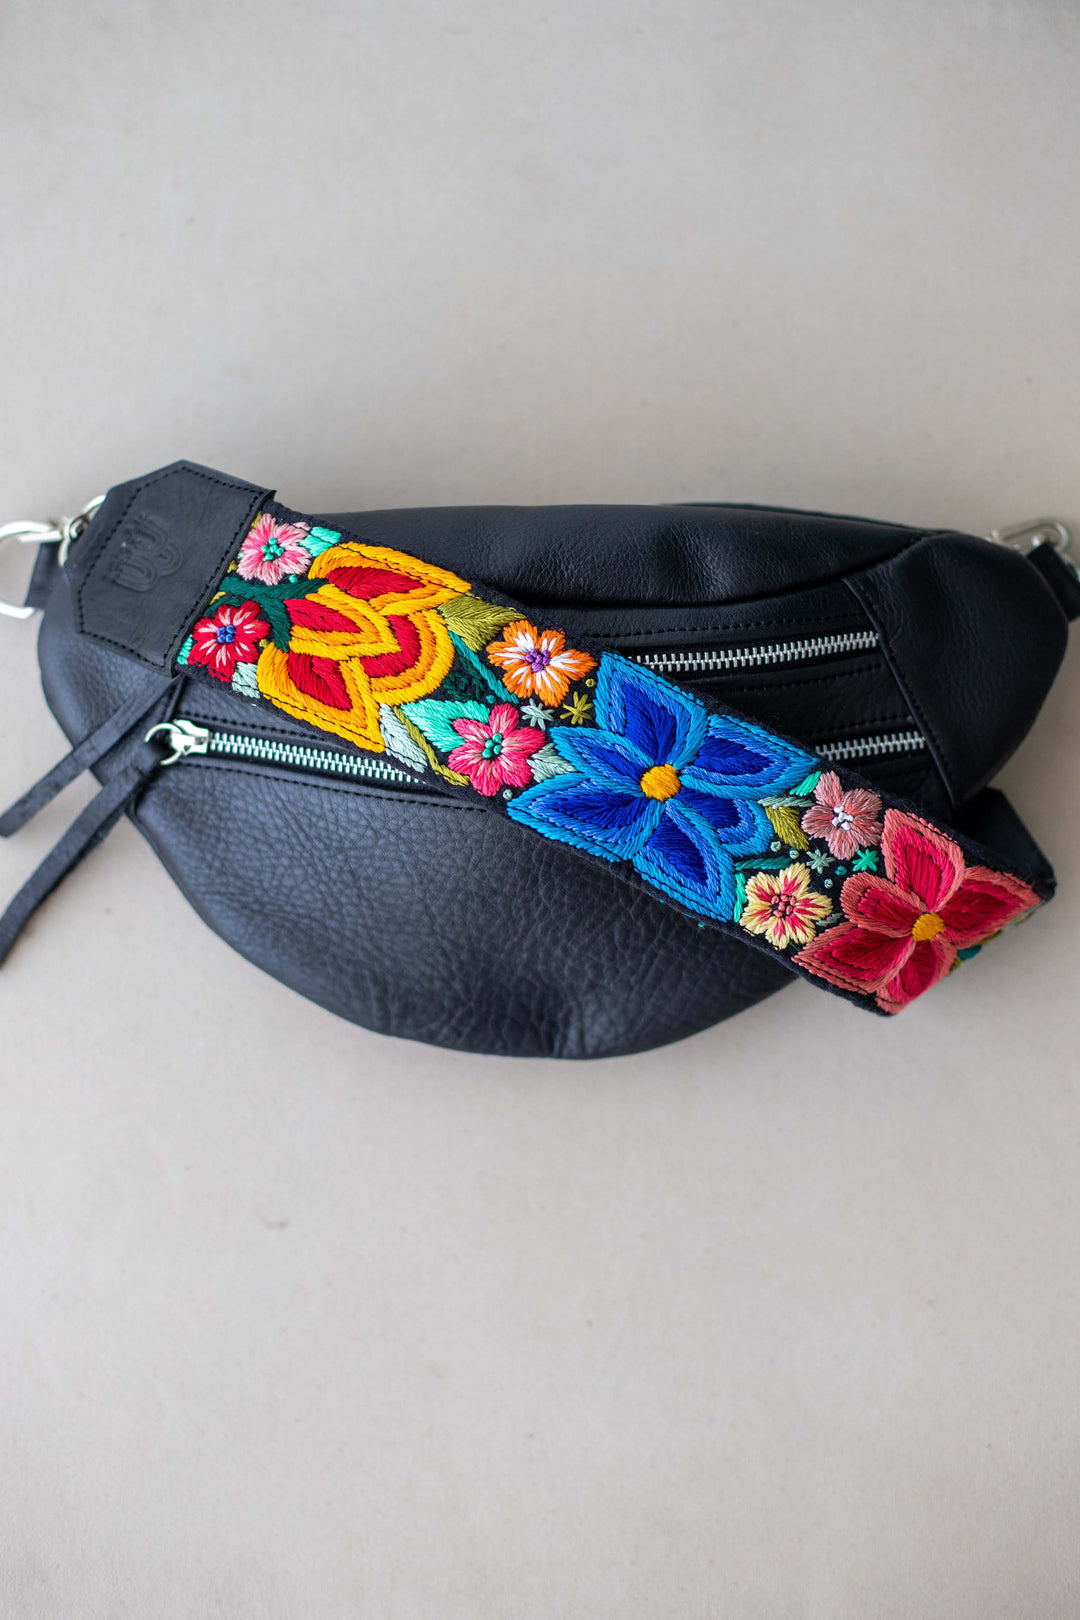 Hand Matters. Black leather sling bag with embroidered strap!